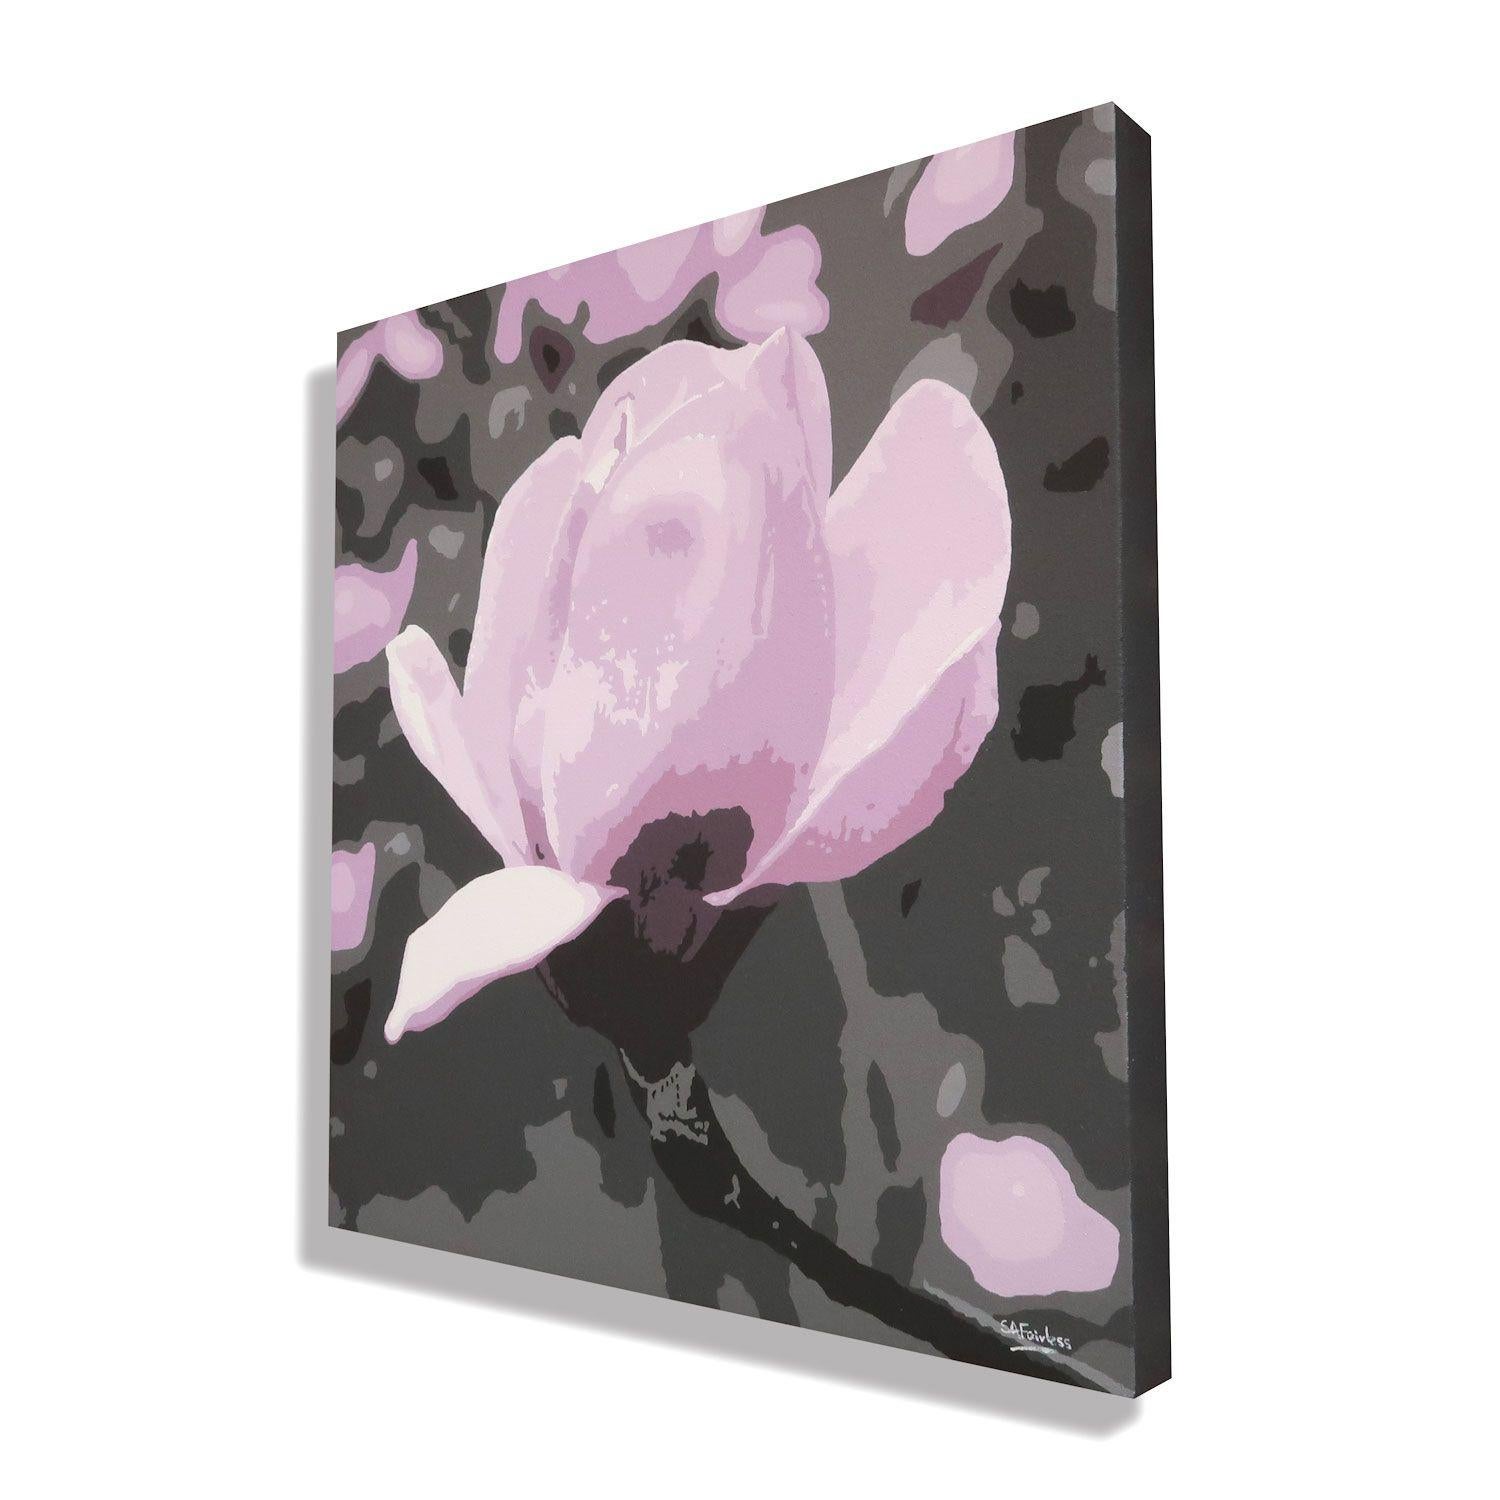 A graphic floral pop art painting of a magenta magnolia flower in spring. I've spent a some lovely days taking photographs of these magnificent flowers in The Savill Garden, Windsor. They are a real tonic and signal an end to winter. Beautifully